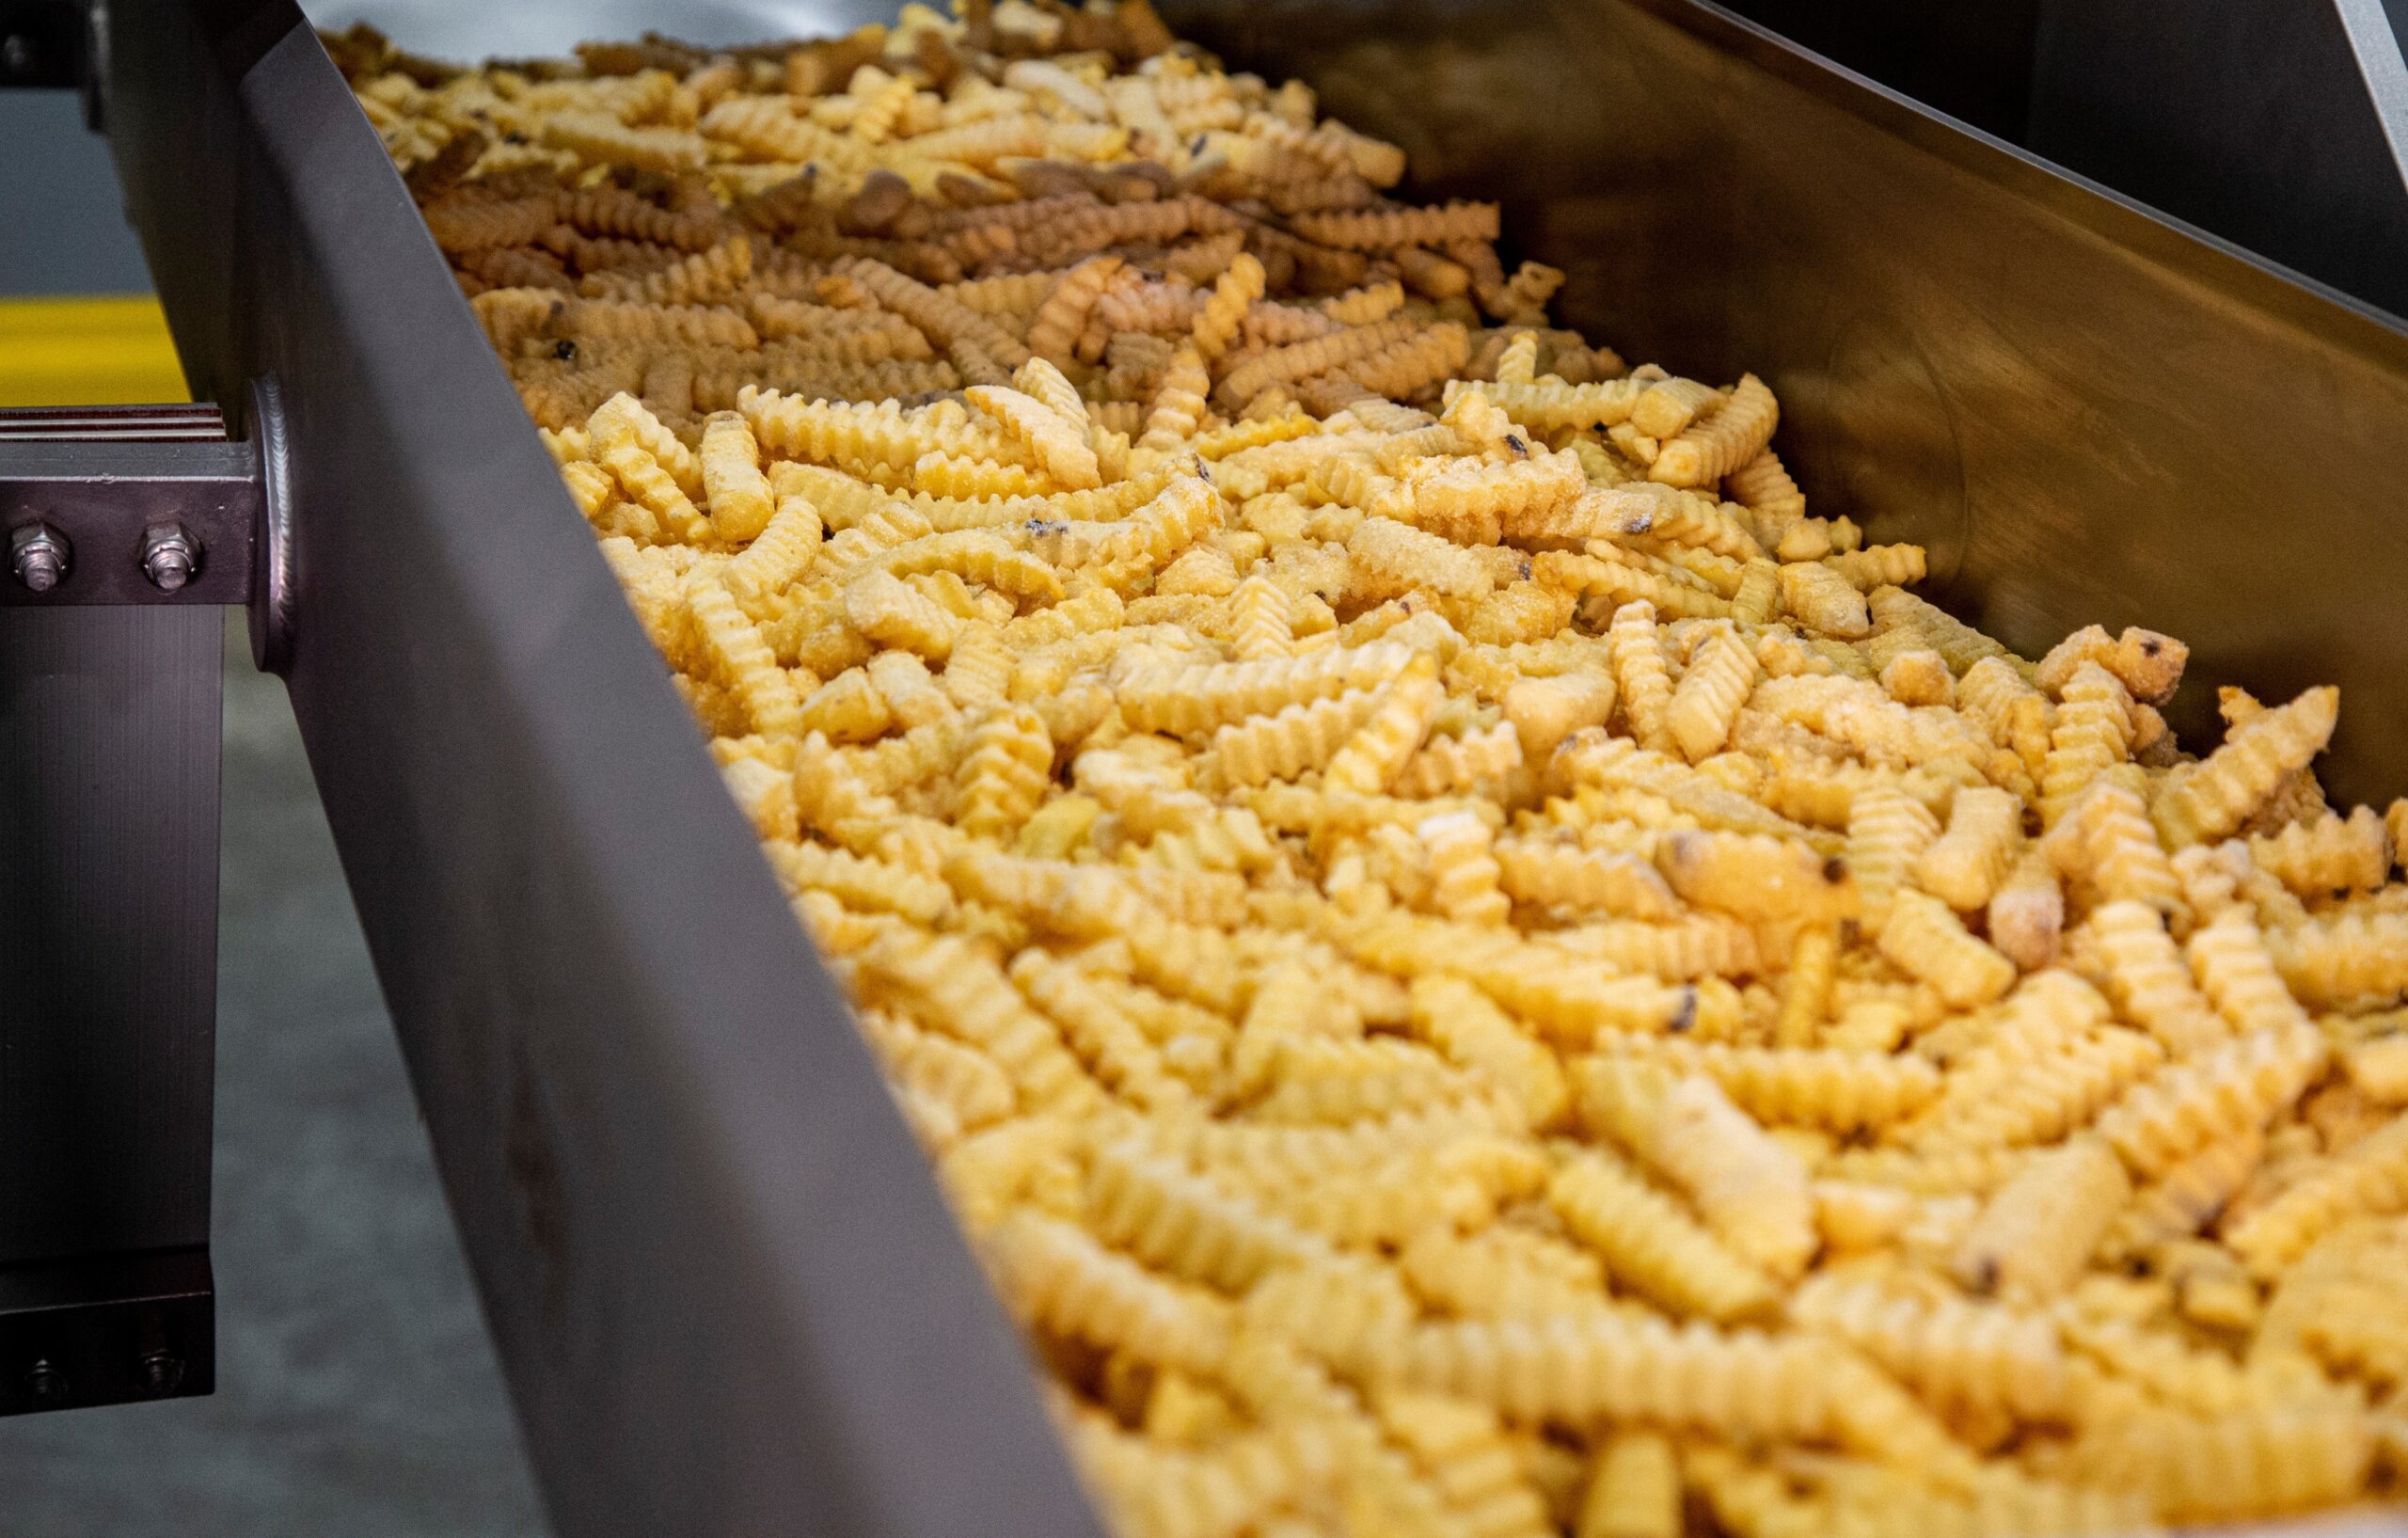 After processing frozen french fries, a vacuum or air knife might be needed to clean this vibratory conveyor.